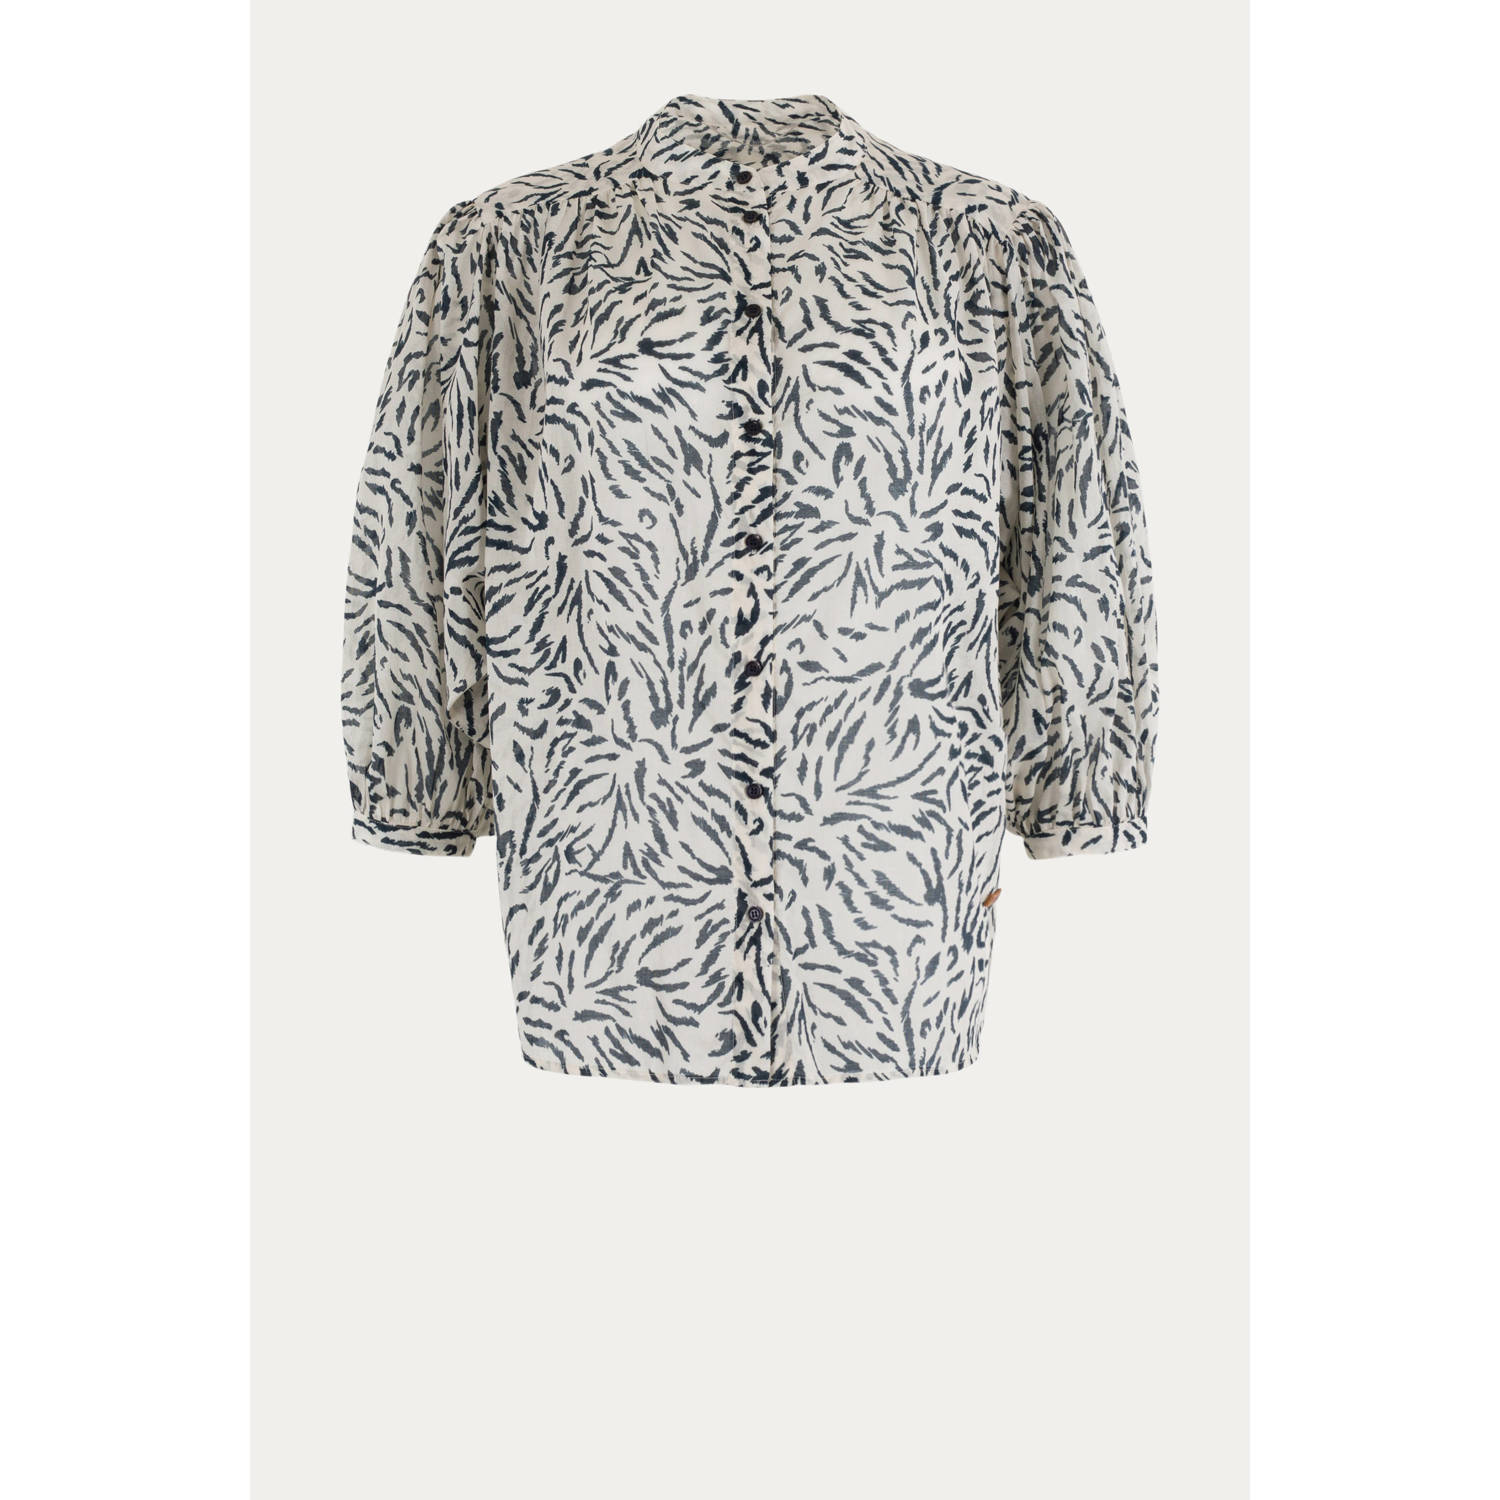 Moscow blouse met all over print zwart wit